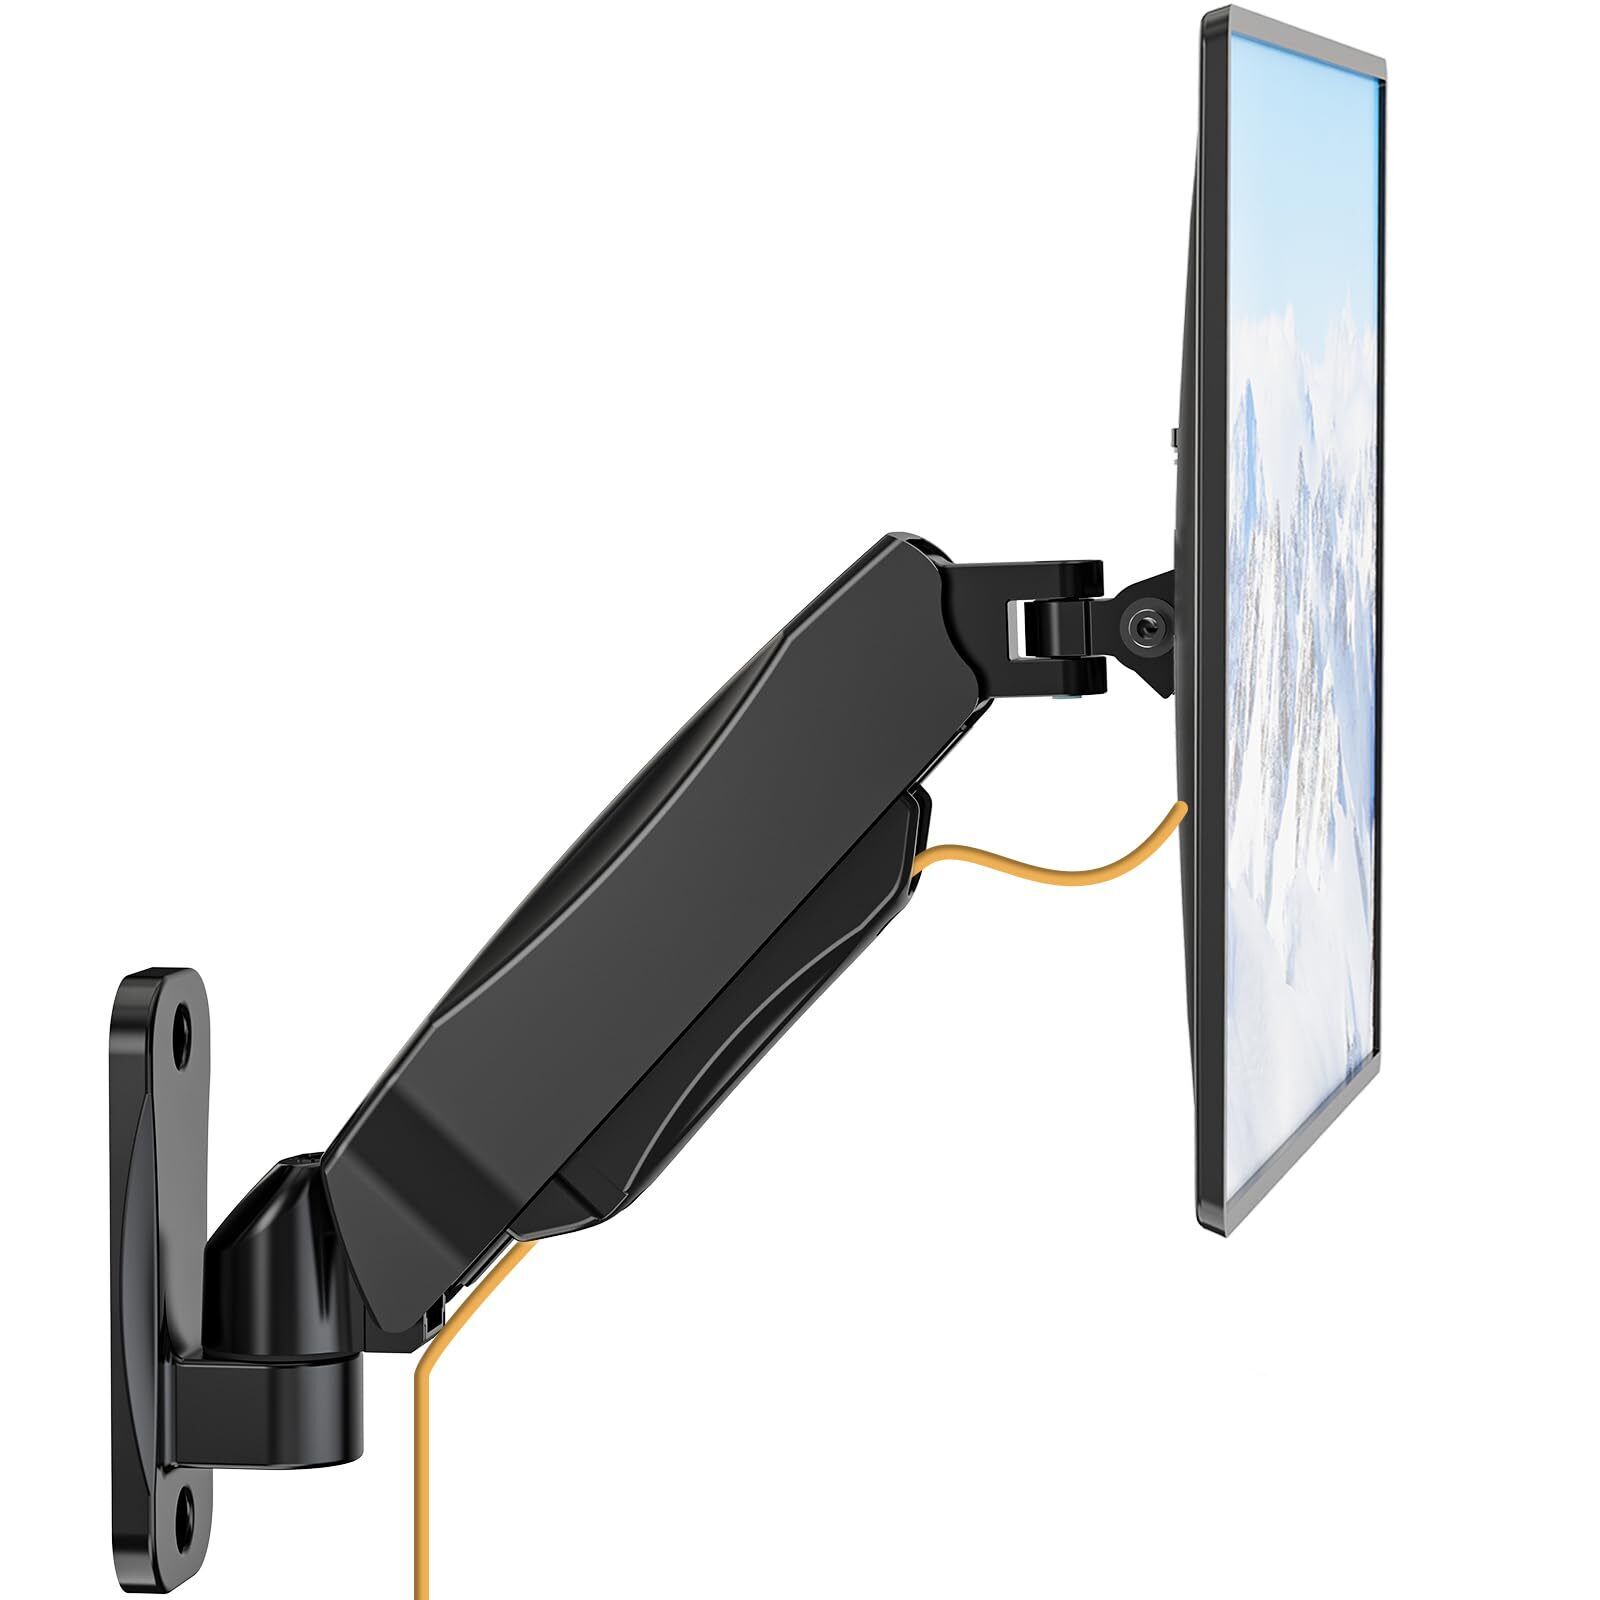 WALI Monitor Wall Mount, Computer Wall Mount Monitor Arm Fits 1 Screen up to 32